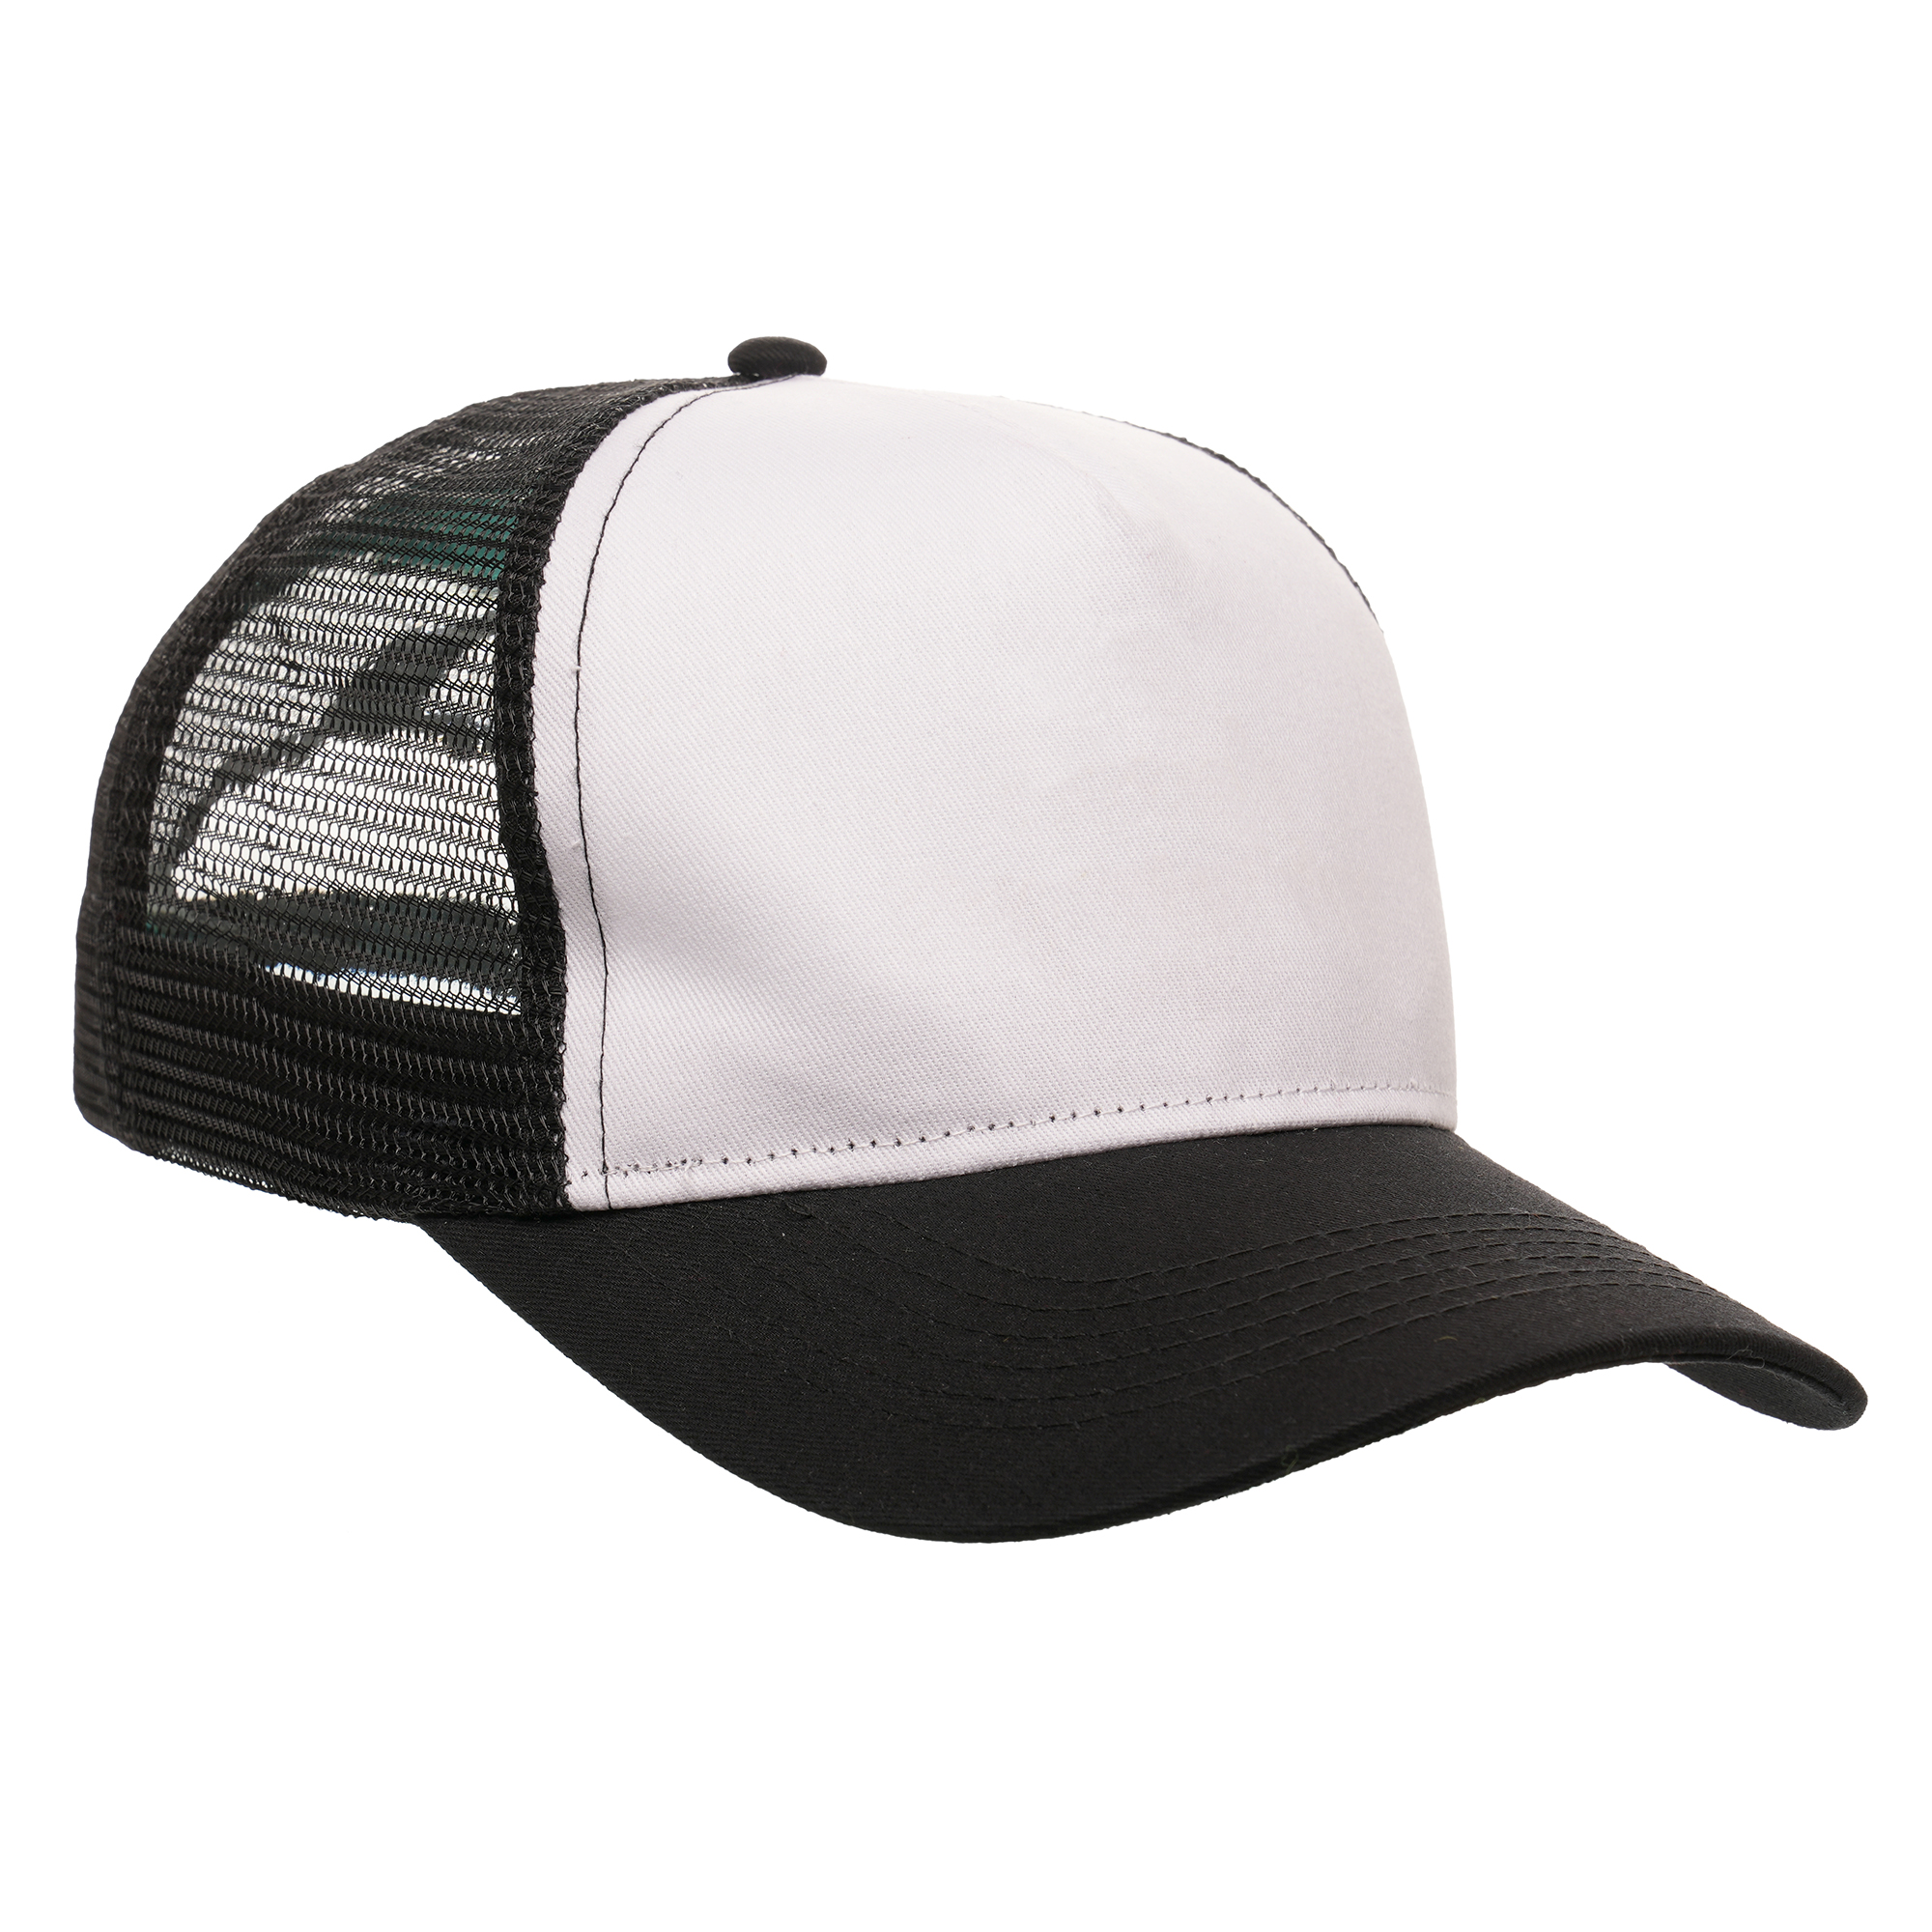 his 5-panel adult’s cap has a coloured pre-curved peak with a colour matched mesh back and a large white front panel, the perfect blank canvas to showcase your brand. The stylish snapback size adjuster ensures a secure and customisable fit for all. Crafted from a cotton and polyester blend, this cap is comfortable to wear, durable to withstand everyday use and offers a quirky alternative to a regular cap. Available inselect colours.